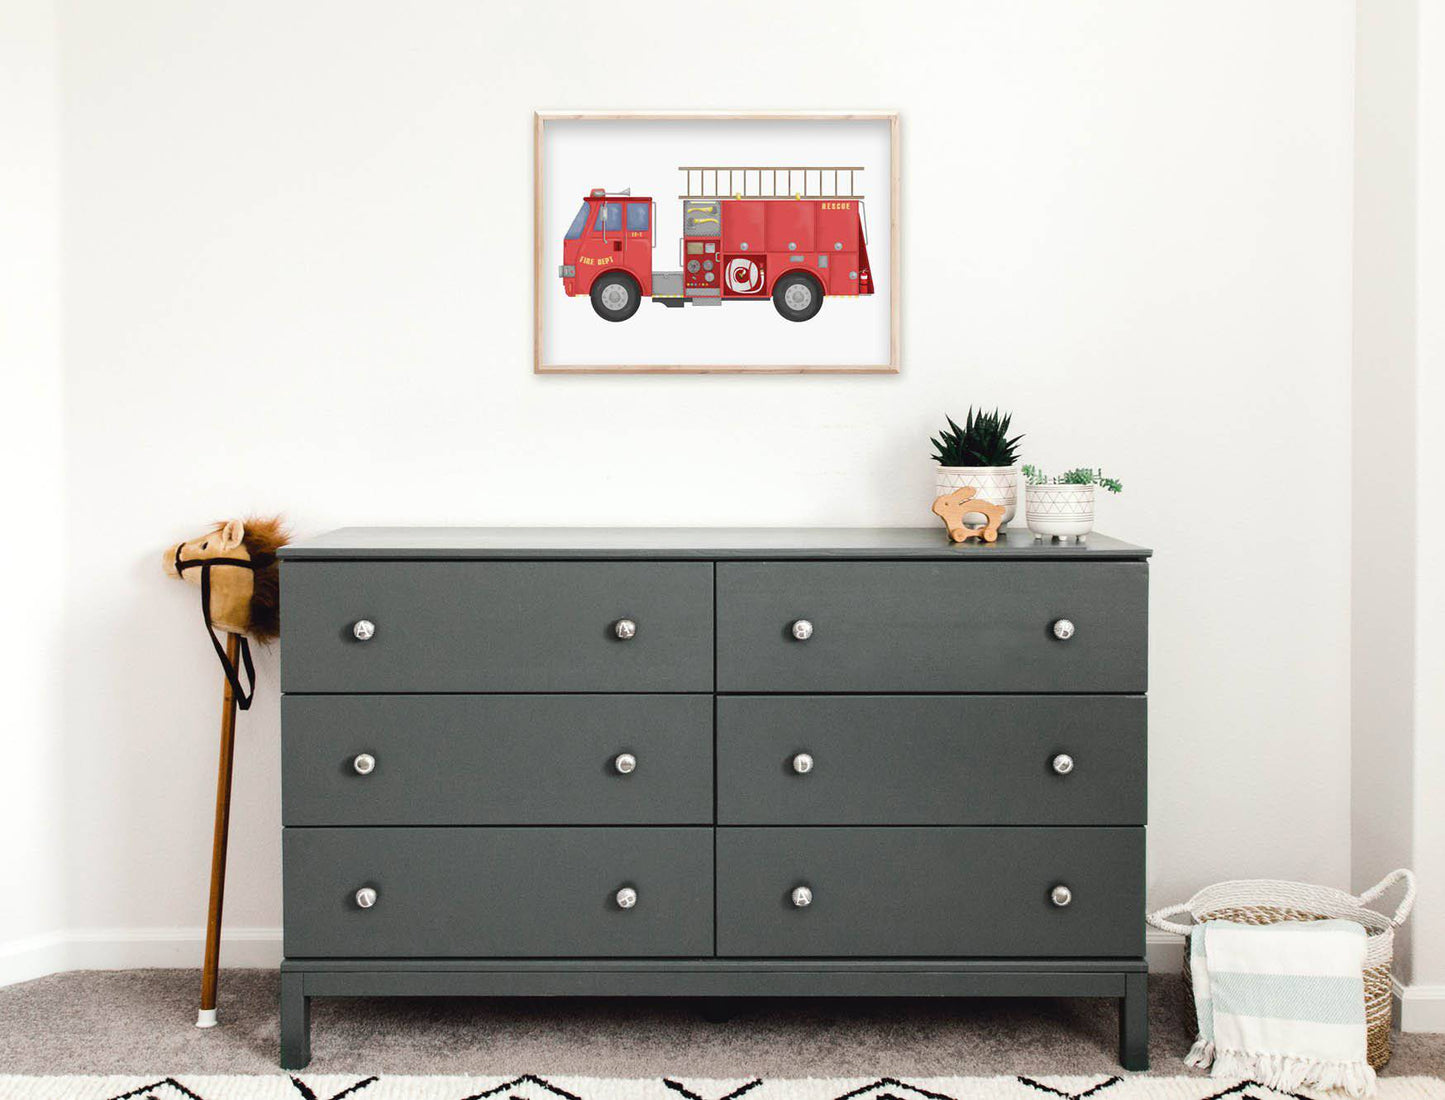 Fire Engine Print | Personalised Word Print - Kids Wall Art - Fable and Fawn 